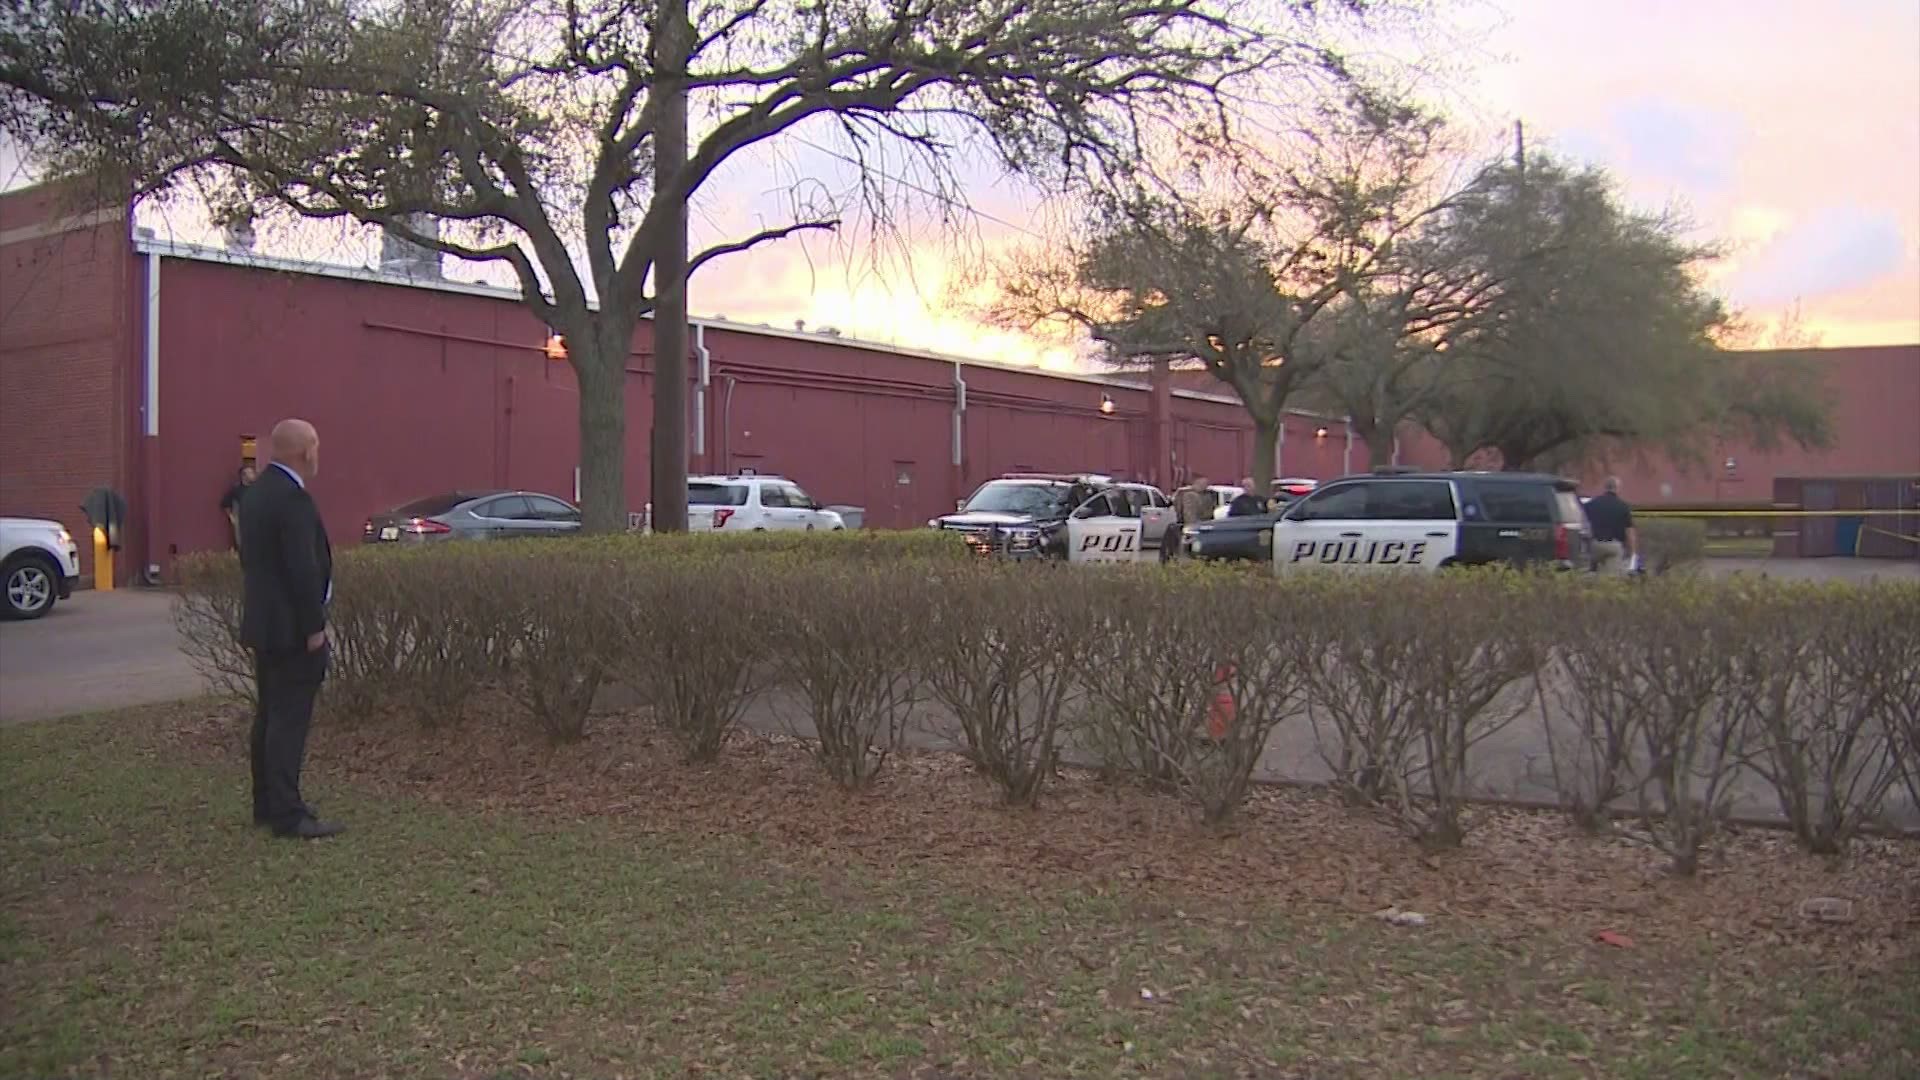 A man wanted in connection with a deadly family disturbance was found dead in a dumpster Saturday afternoon in Sugar Land.